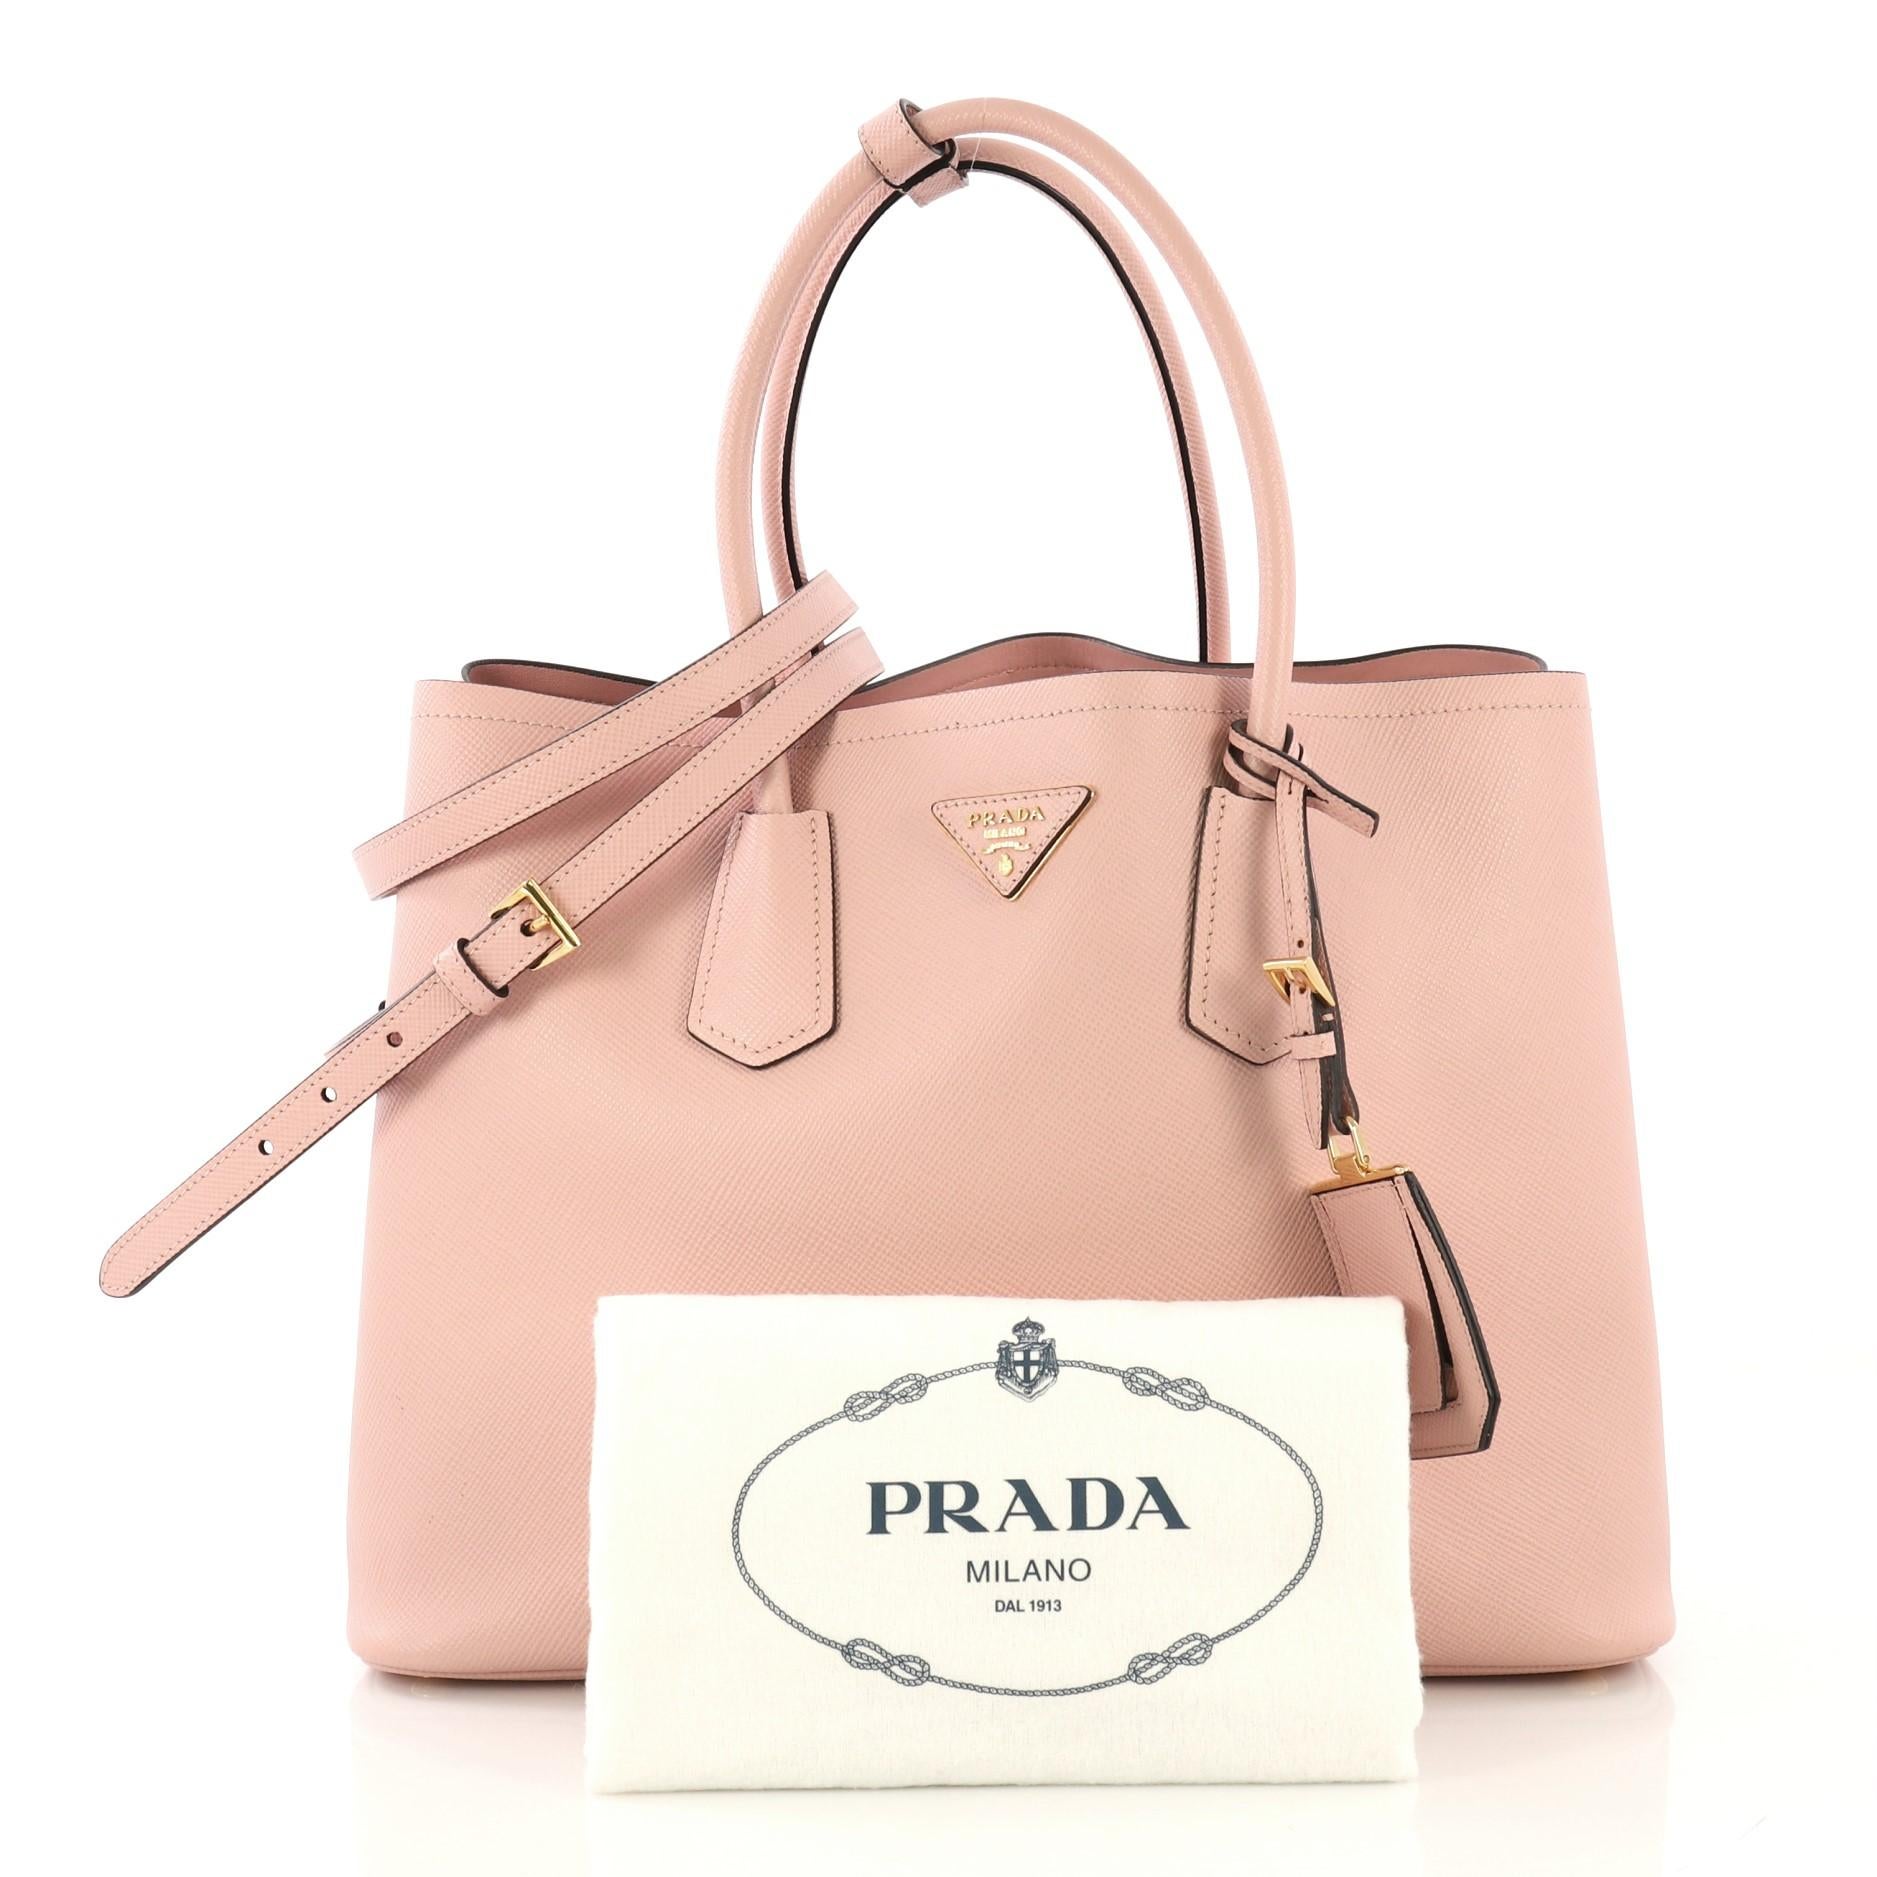 This Prada Cuir Double Tote Saffiano Leather Large, crafted from light pink saffiano leather, features dual rolled handles, triangle logo at the center, and gold-tone hardware. It opens to a pink leather interior with middle flap compartment.